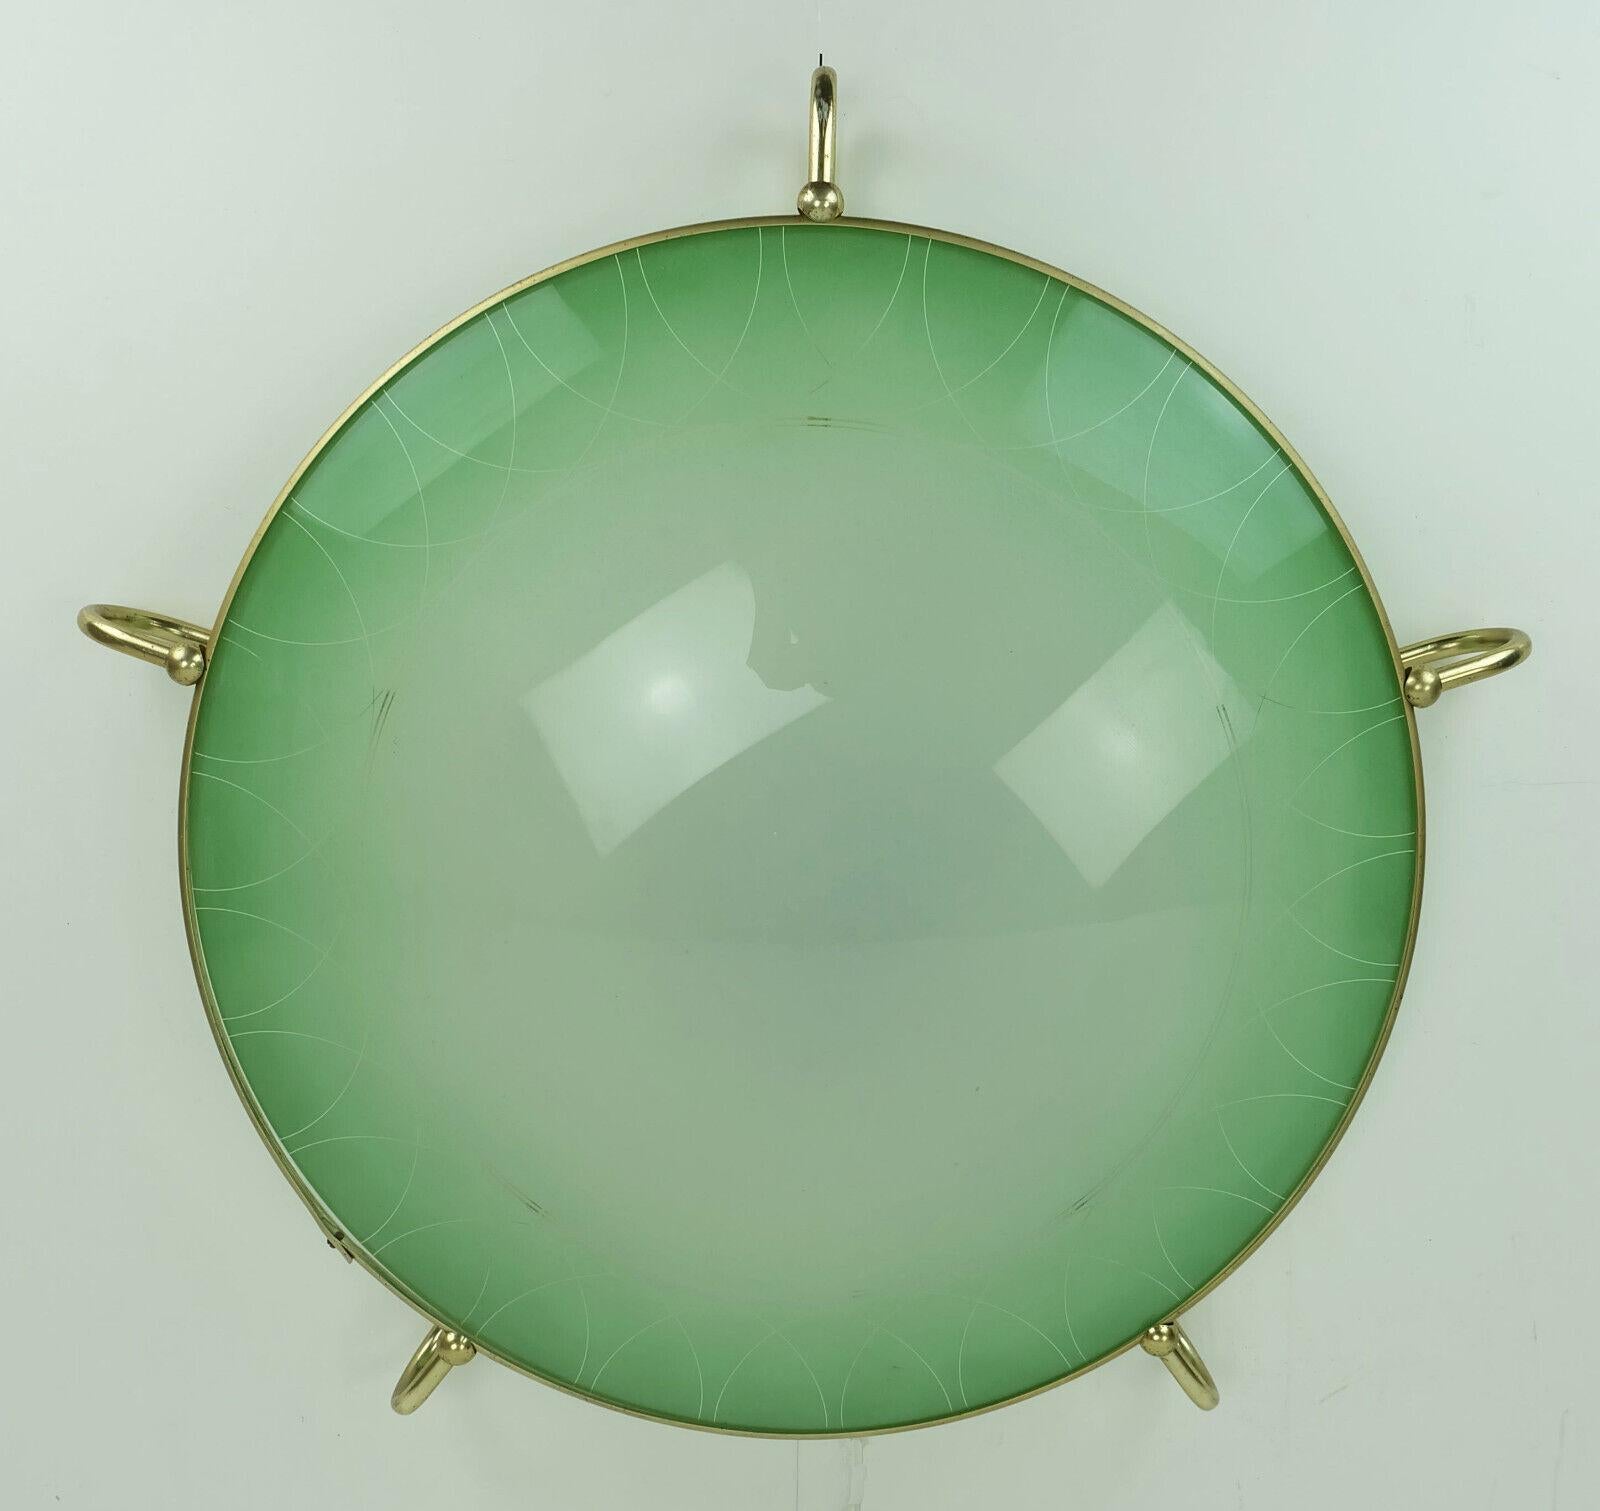 Very beautiful 1950s vintage ceiling light by Erco-Leuchten. Model No. 70 in a rare version in green glass with a graphic pattern (the version with a plastic shade is more common). The frame is made of brass-colored anodized light metal, the center